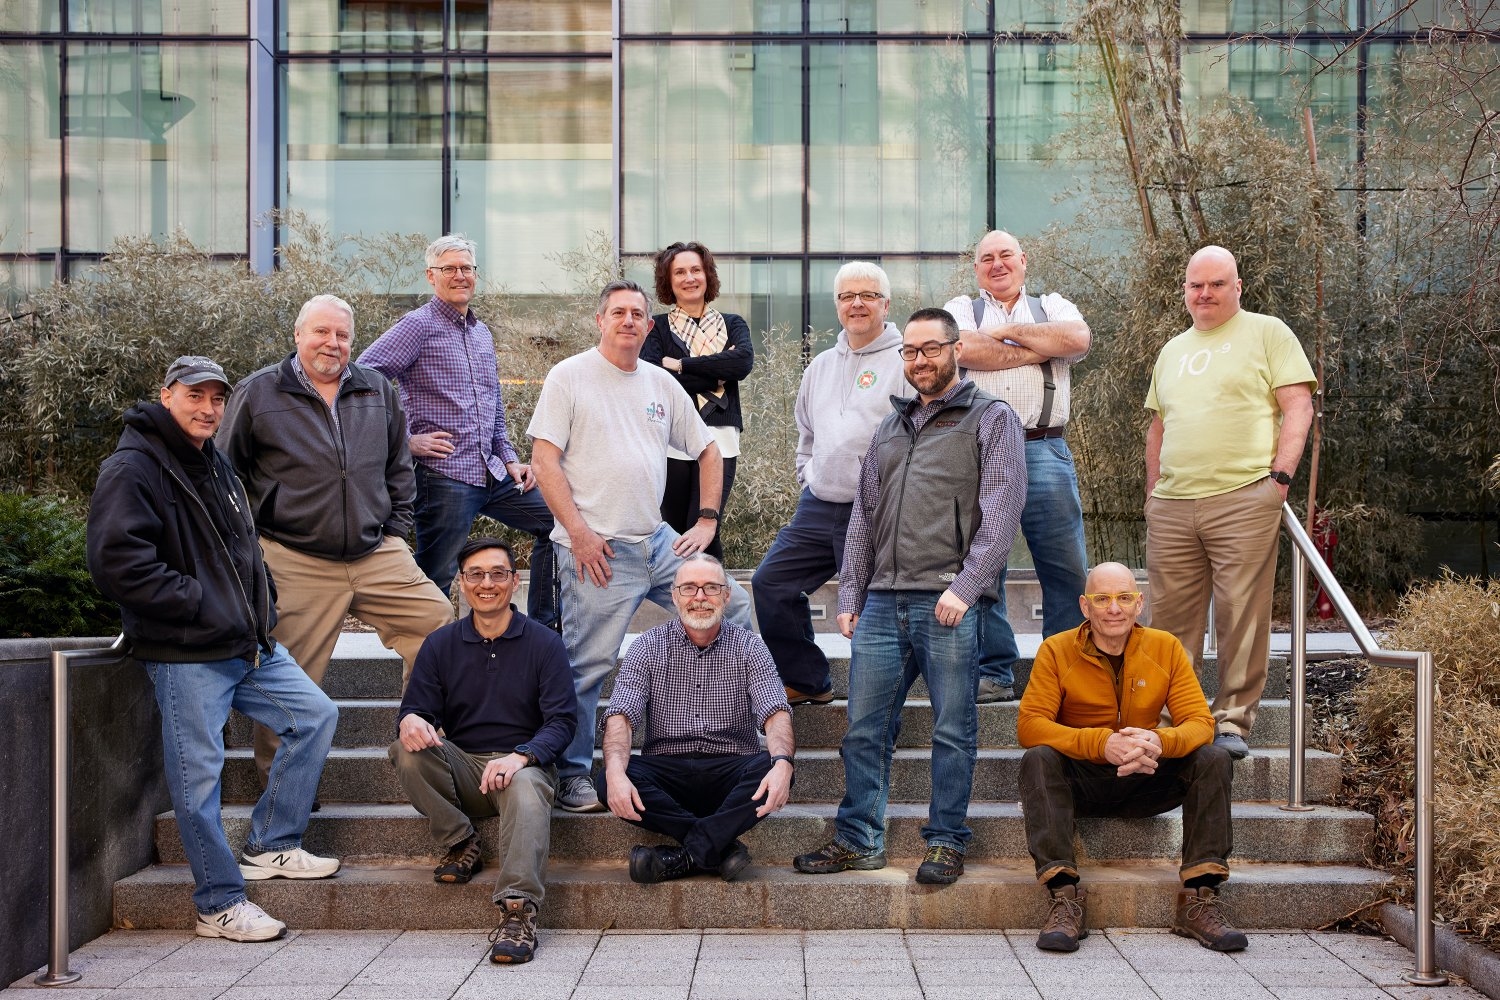 A core team of MIT technical staff moved along with tools and instruments to MIT.nano when it opened in 2018, bring with them more than 400 combined years of technical experience. Among the group are (standing, left to right) Scott Poesse, Paul Tierney, Kurt Broderick, Dave Terry, Luda Leoparde, Jim Daley, Kristofor Payer, Dan Adams, and Dennis Ward; (seated, left to right) Eric Lim, Donal Jamieson, and Mark Mondol.